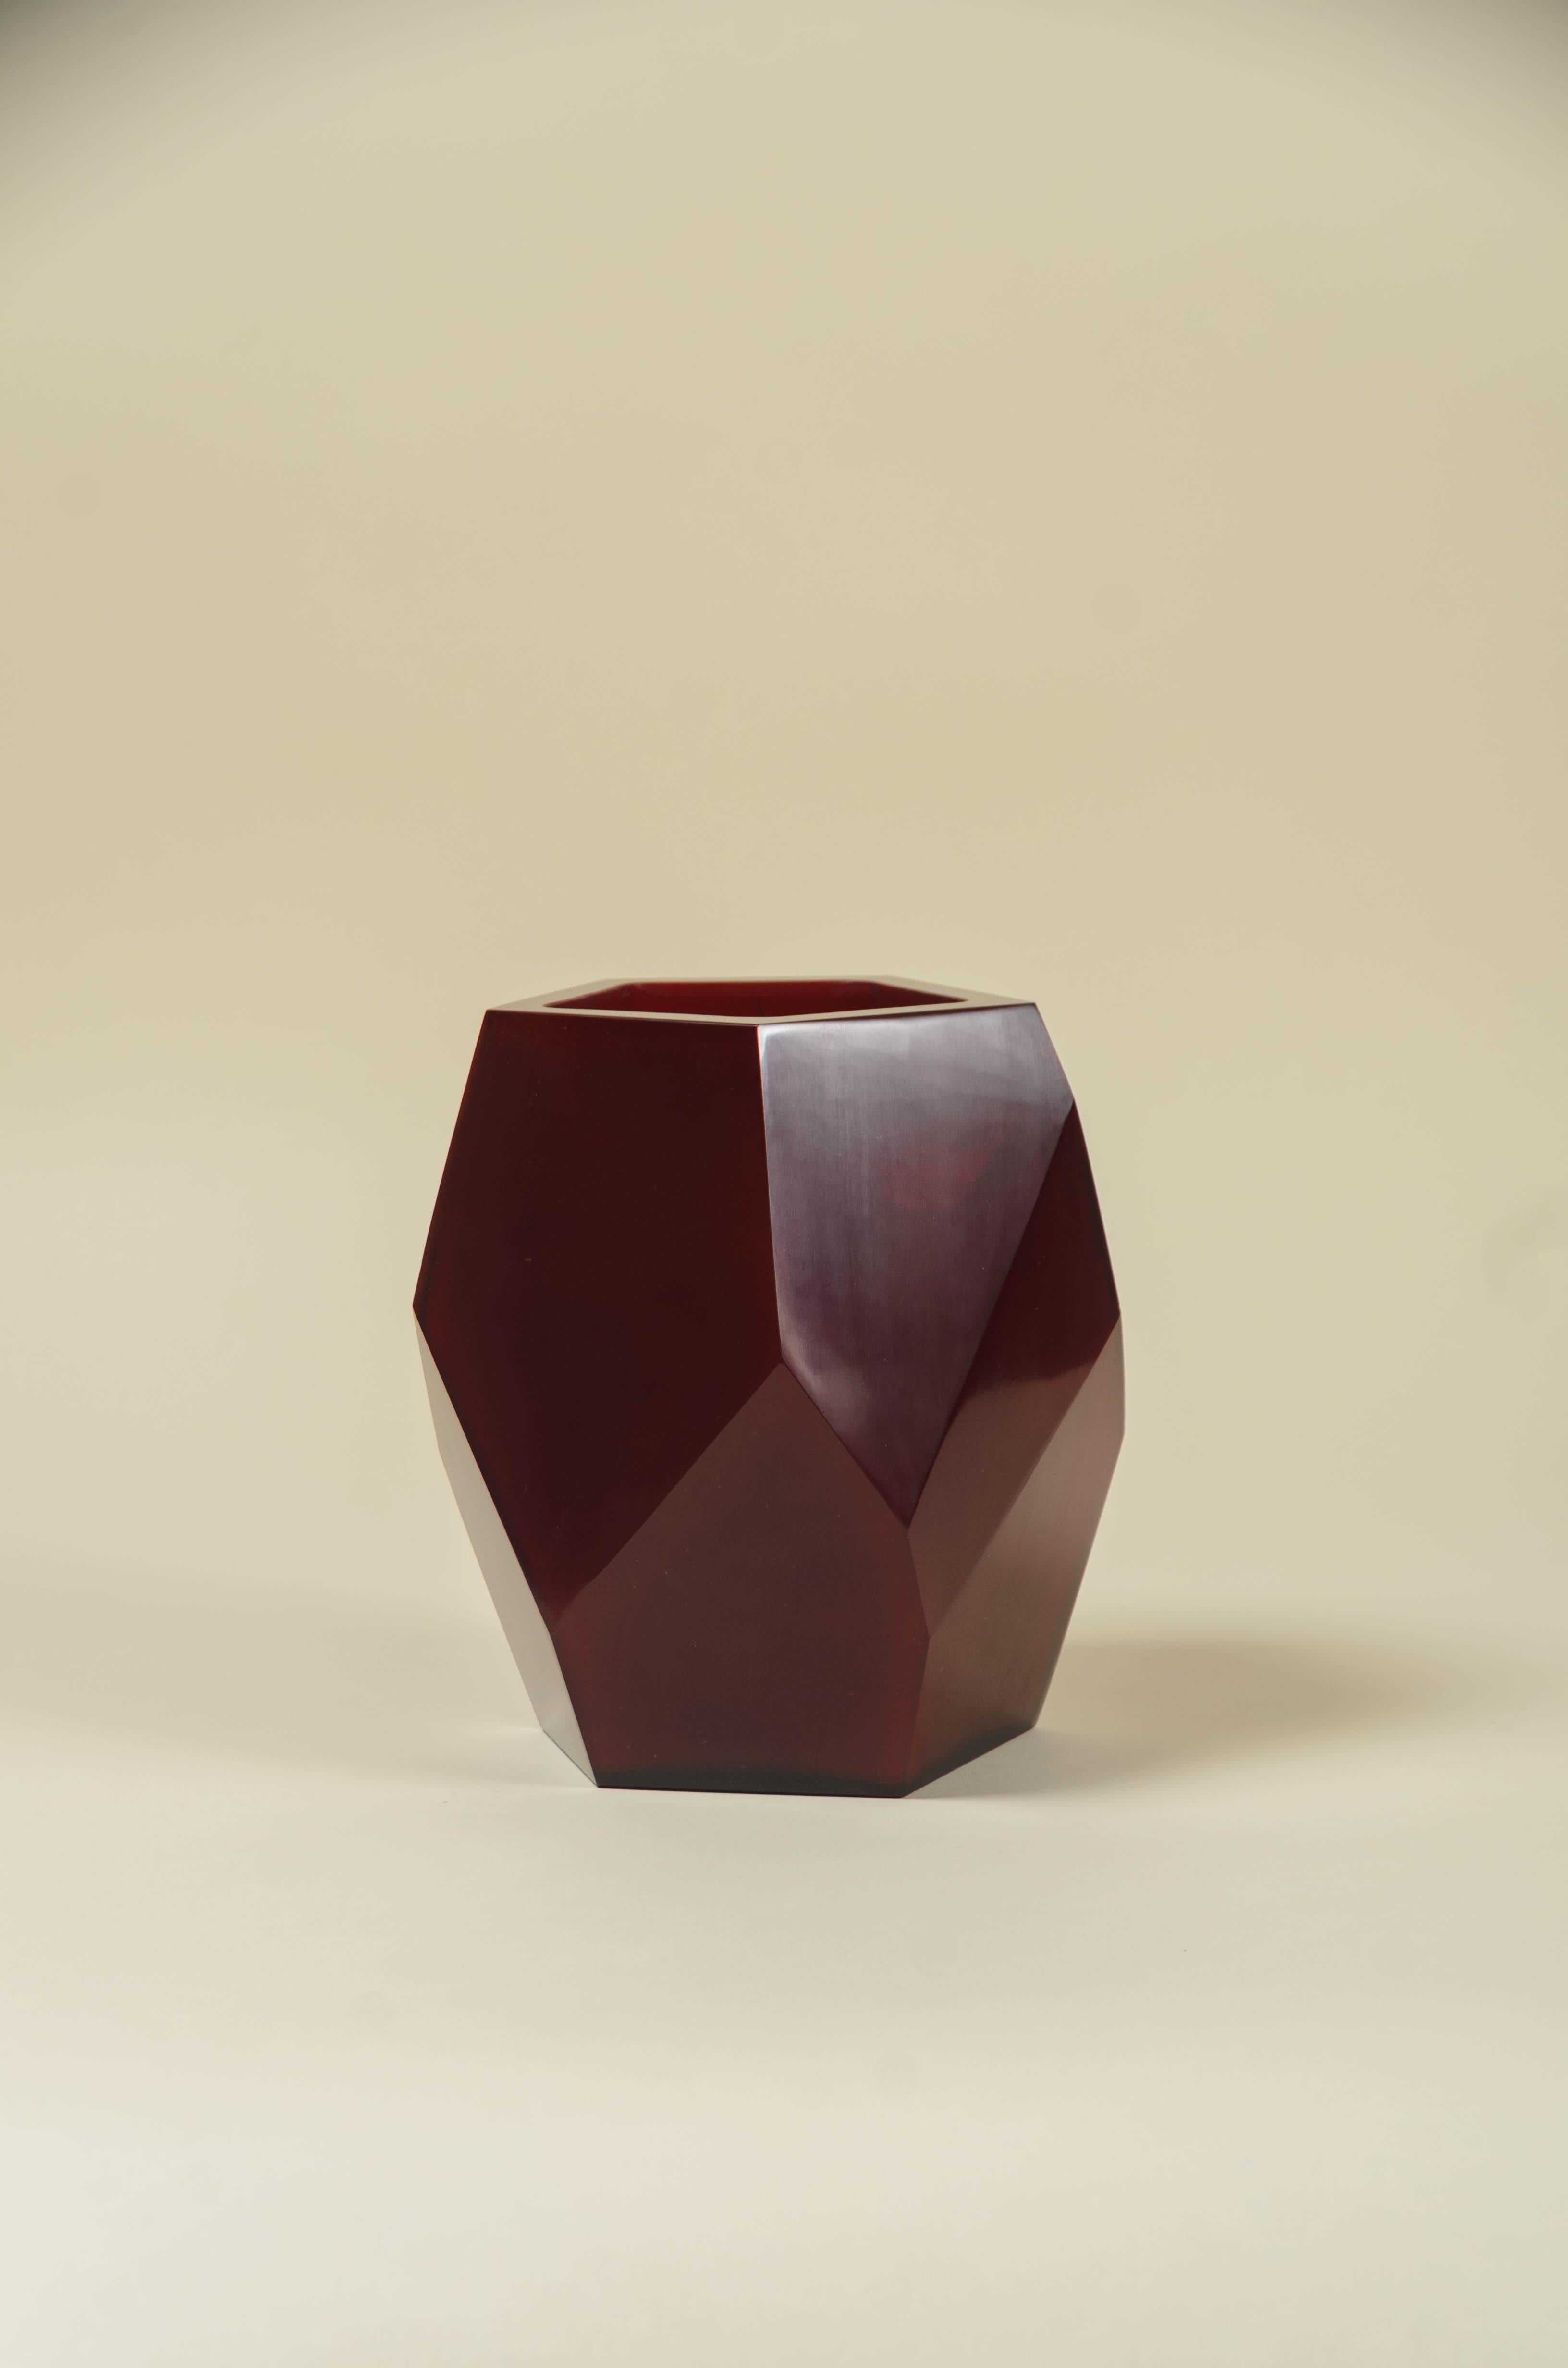 Short Facet Vase
Raspberry
Peking Glass
Hand Blown 
Hand Carved
Contemporary
Limited Edition

Peking glass refers to the high-quality glass art produced by the imperial and 
commercial workshops in Beijing during the Ching Dynasty, China